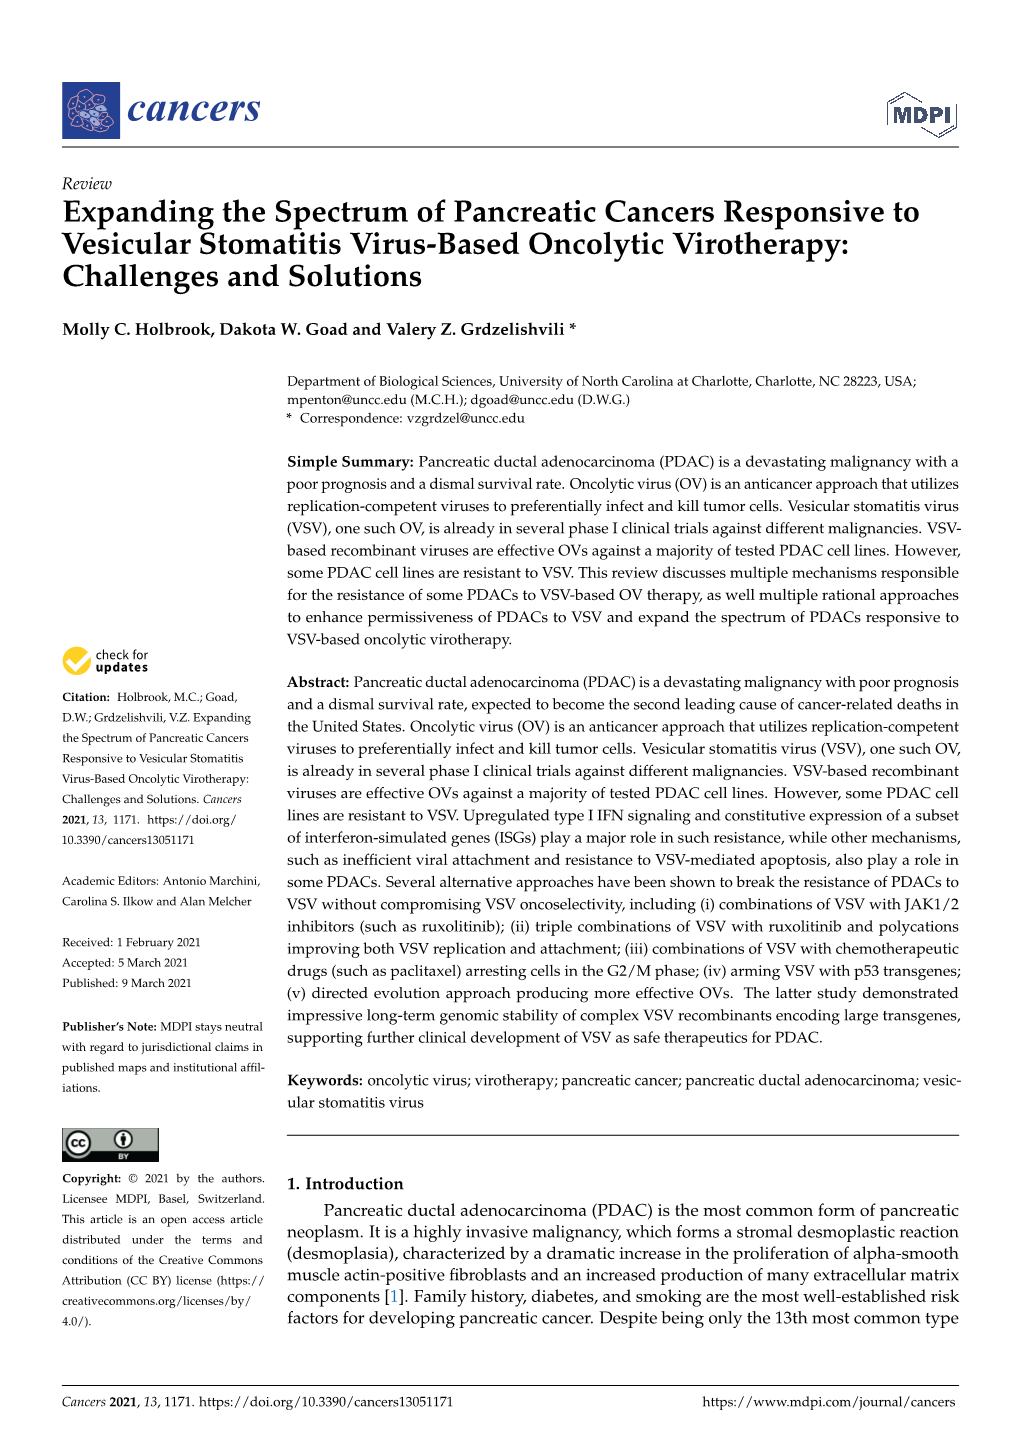 Expanding the Spectrum of Pancreatic Cancers Responsive to Vesicular Stomatitis Virus-Based Oncolytic Virotherapy: Challenges and Solutions